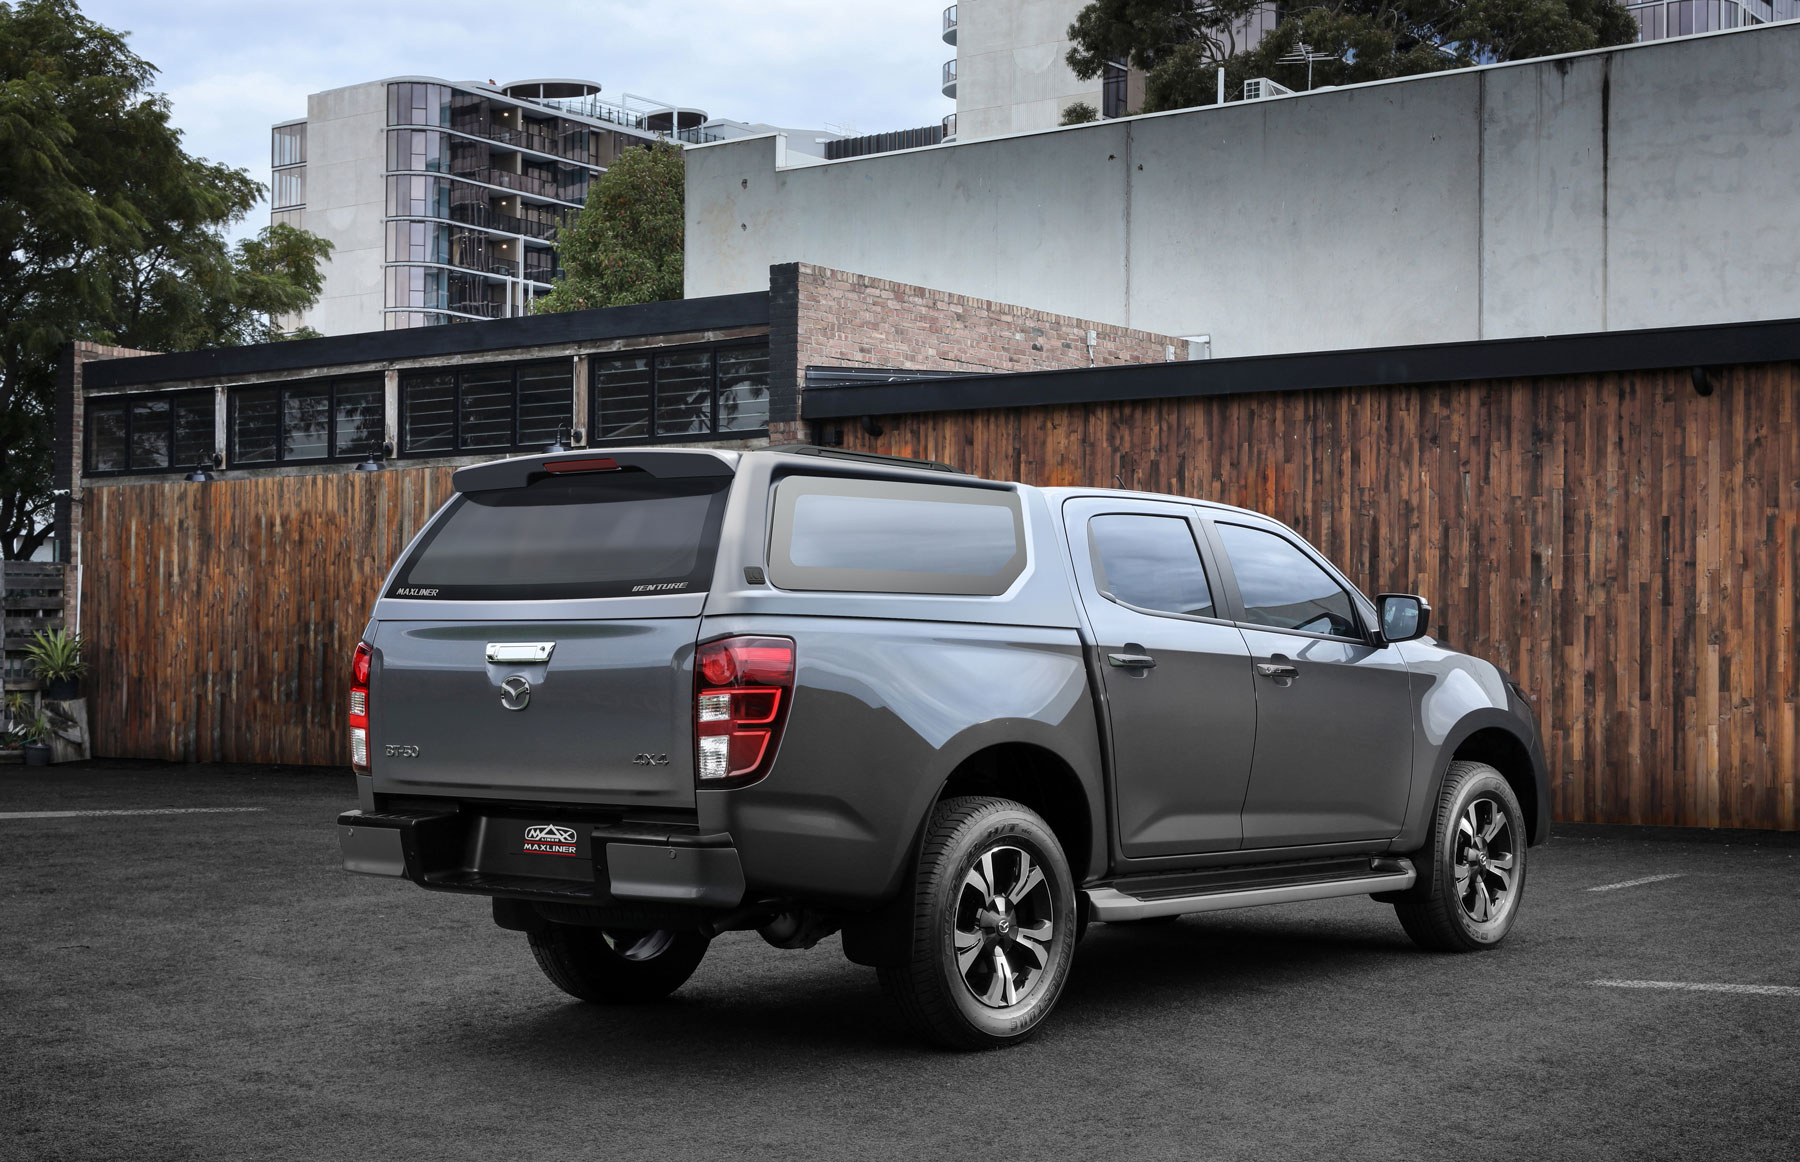 VENTURE CANOPY FOR ISUZU D-MAX & MAZDA BT-50 LAUNCHES Image